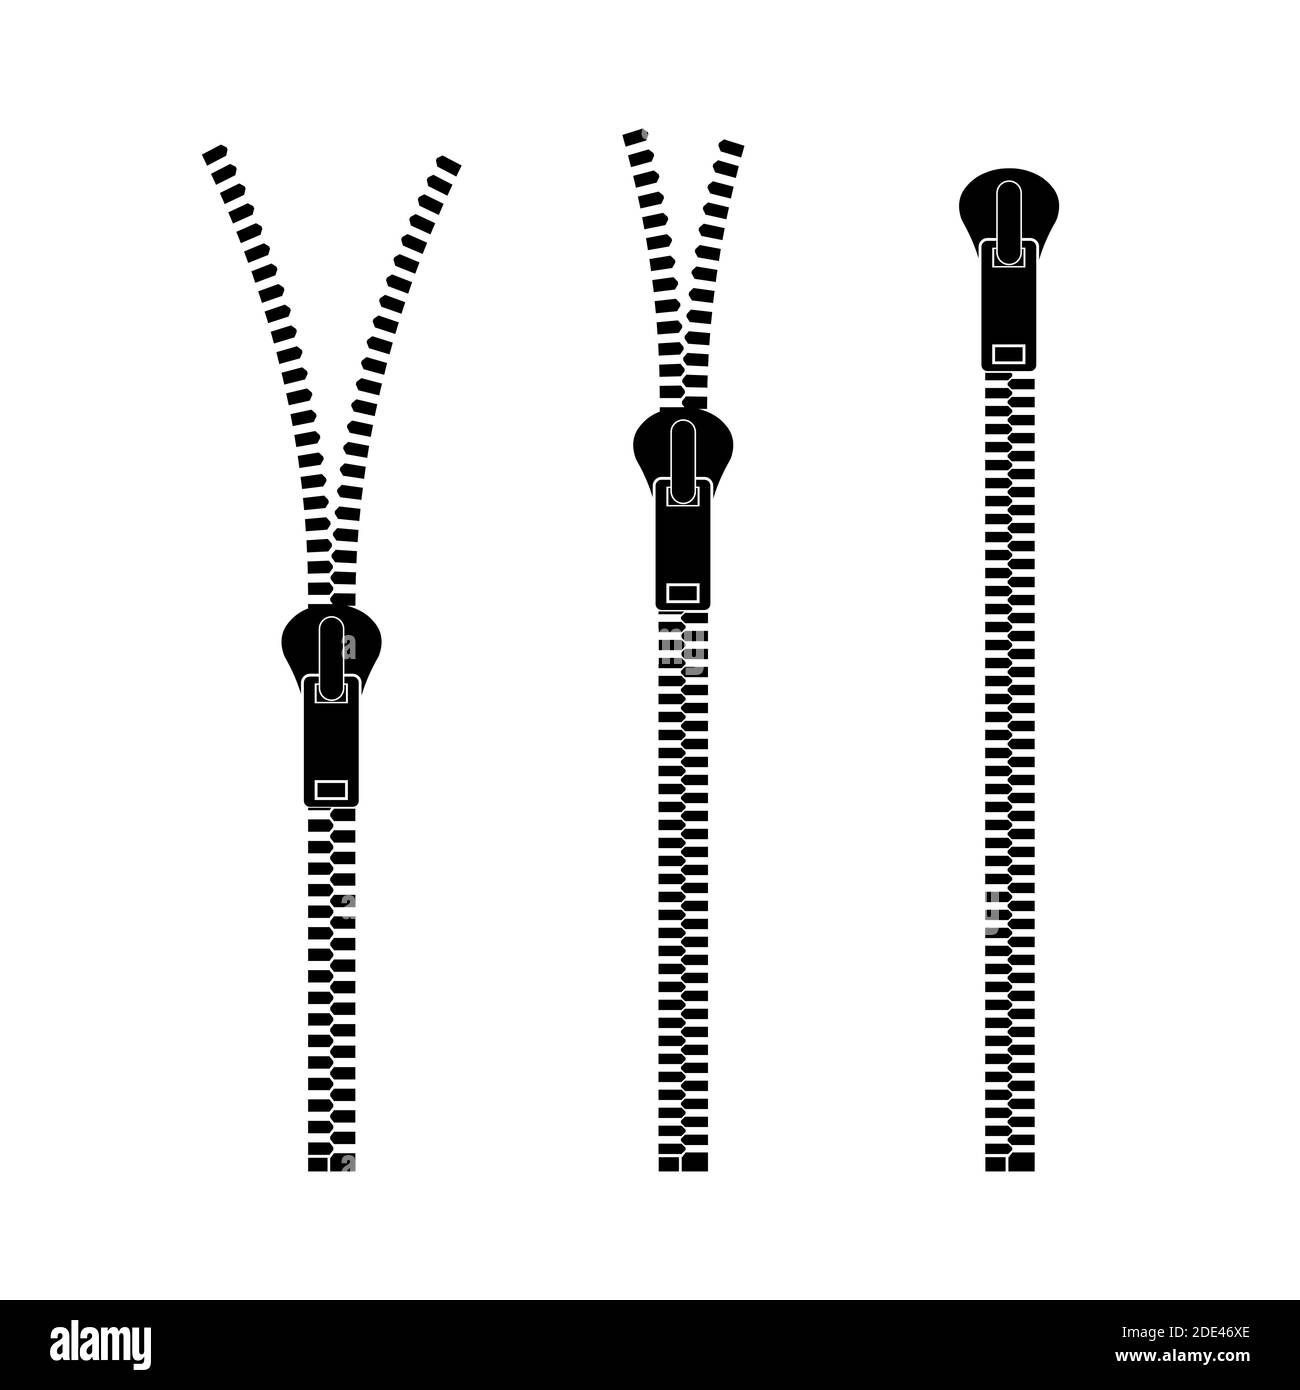 zippers type set fastener. Metallic closed and open zippers and pullers. Vector illustration. Stock Vector